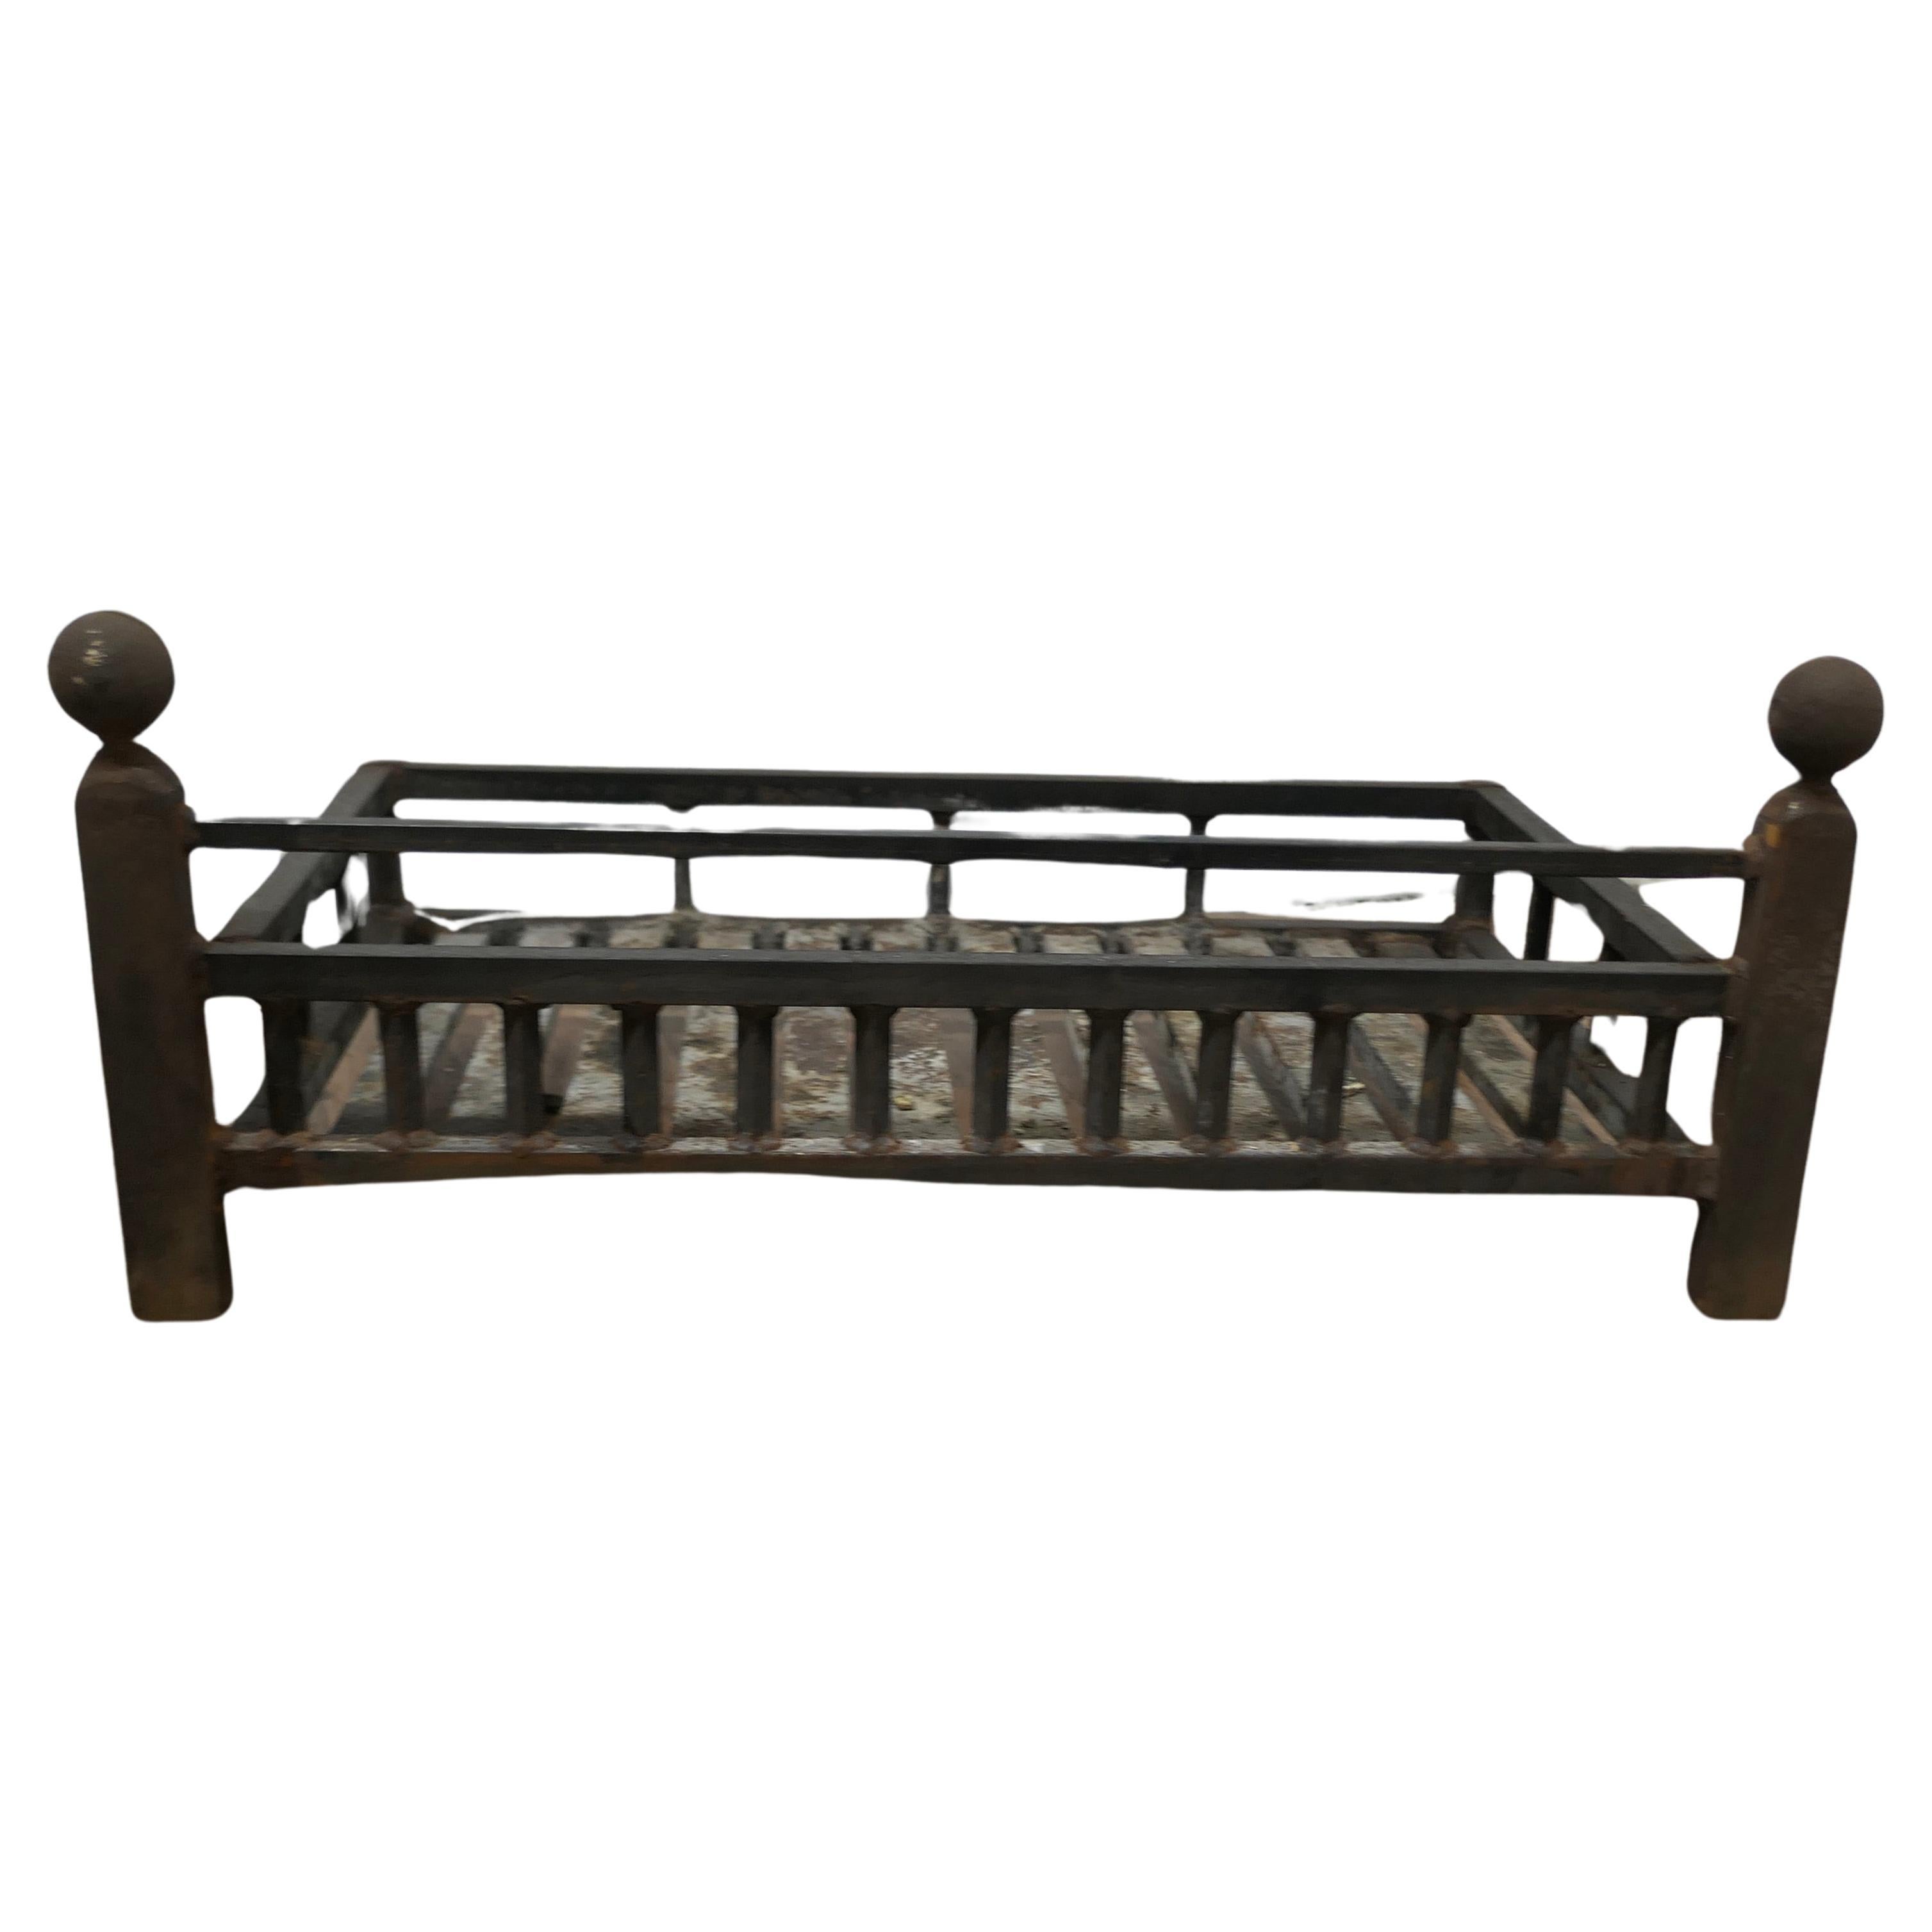 Inglenook Iron Fire Grate    The grate is made in iron with rails all around  For Sale